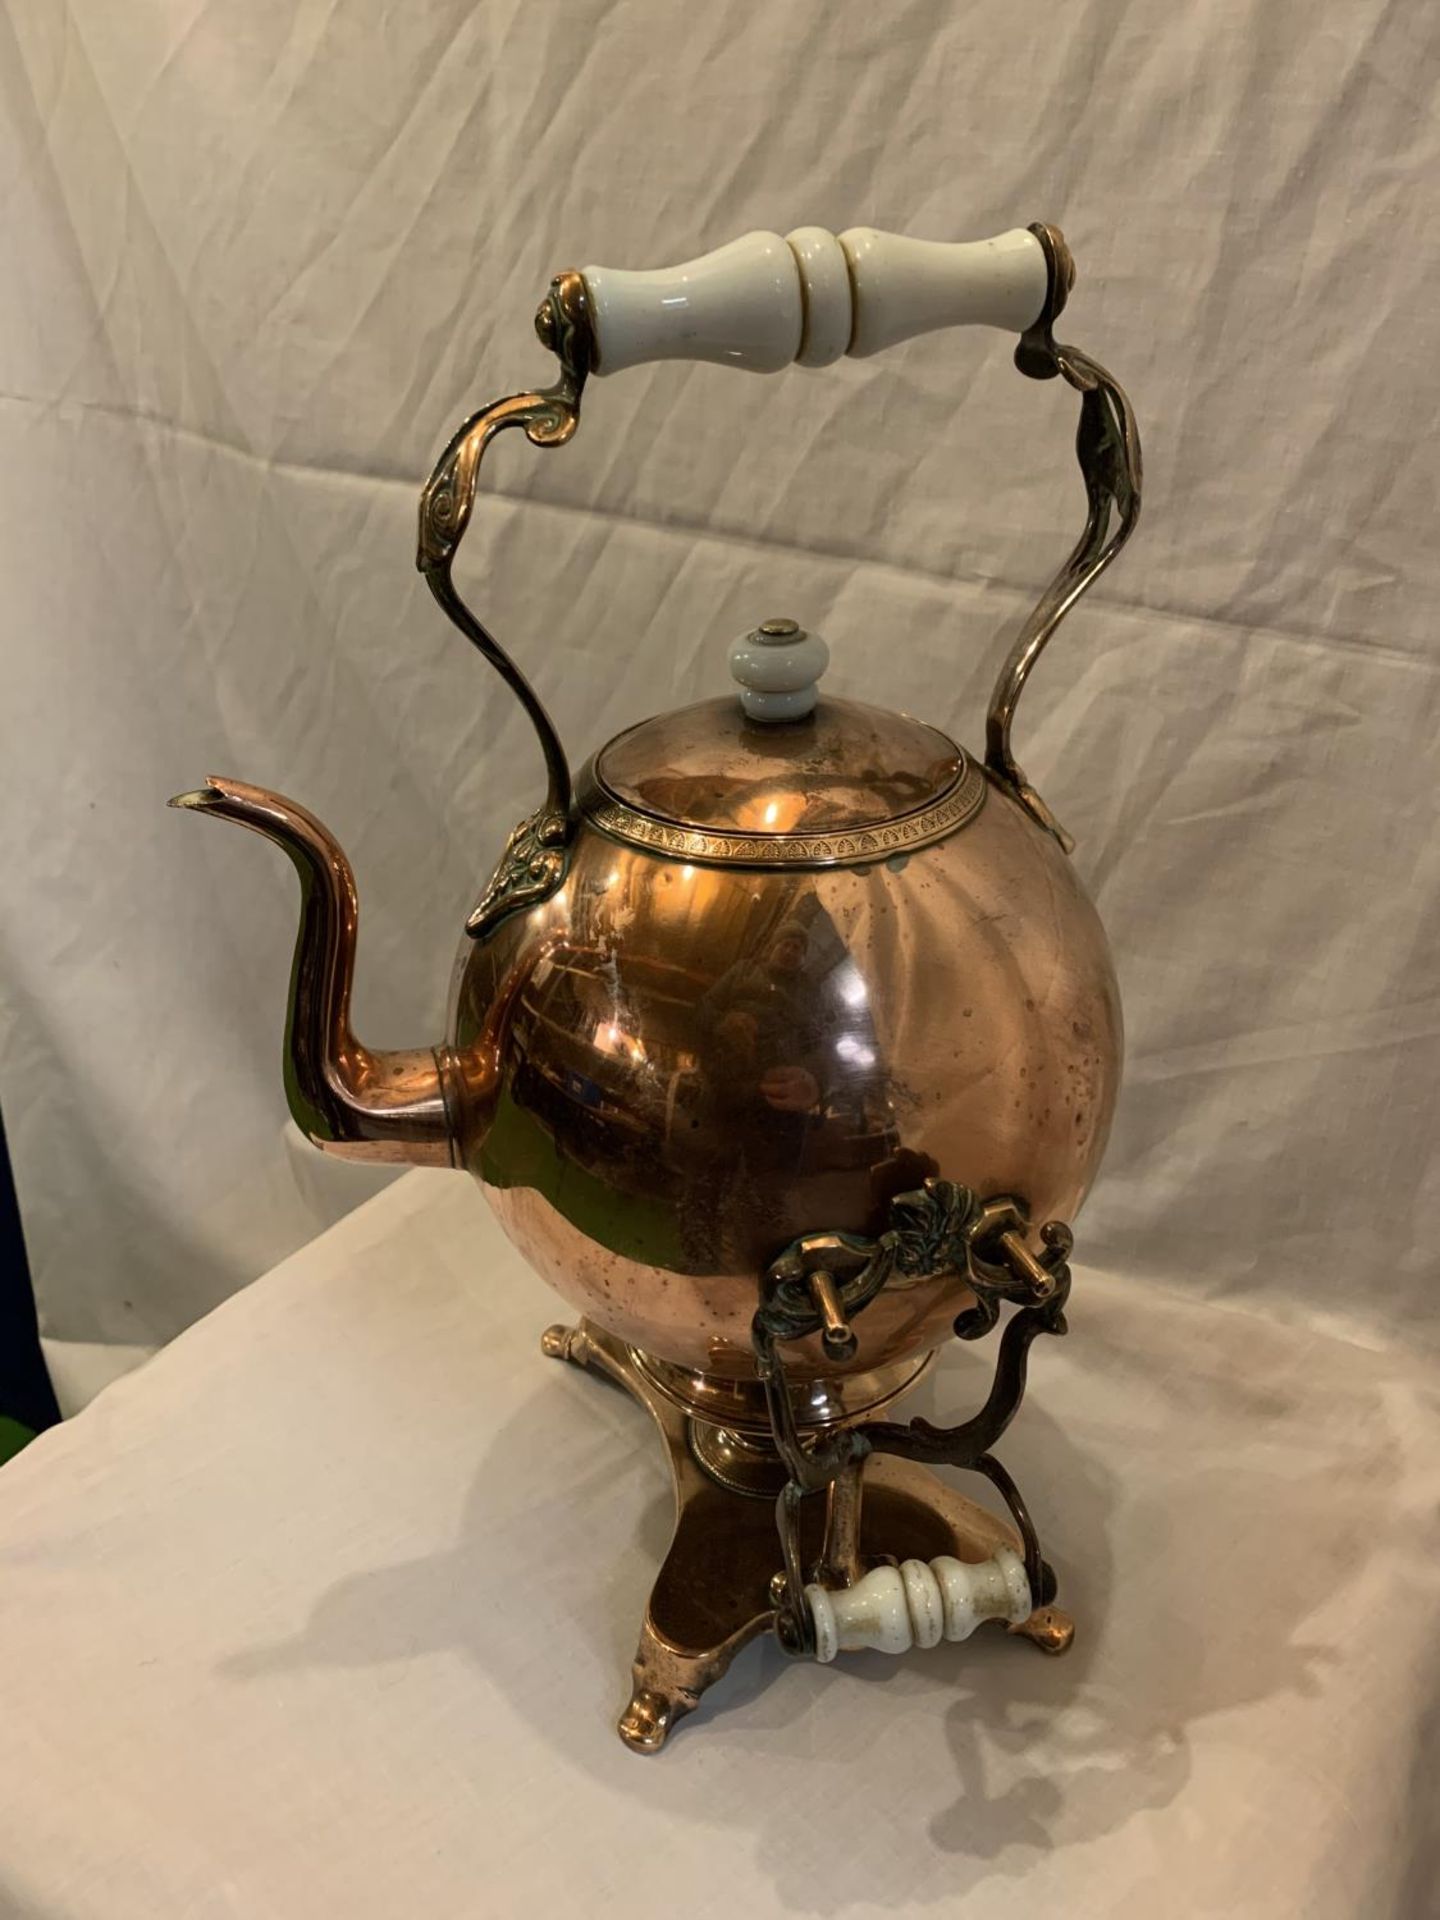 A VINTAGE COPPER KETTLE ON A STAND - Image 4 of 4